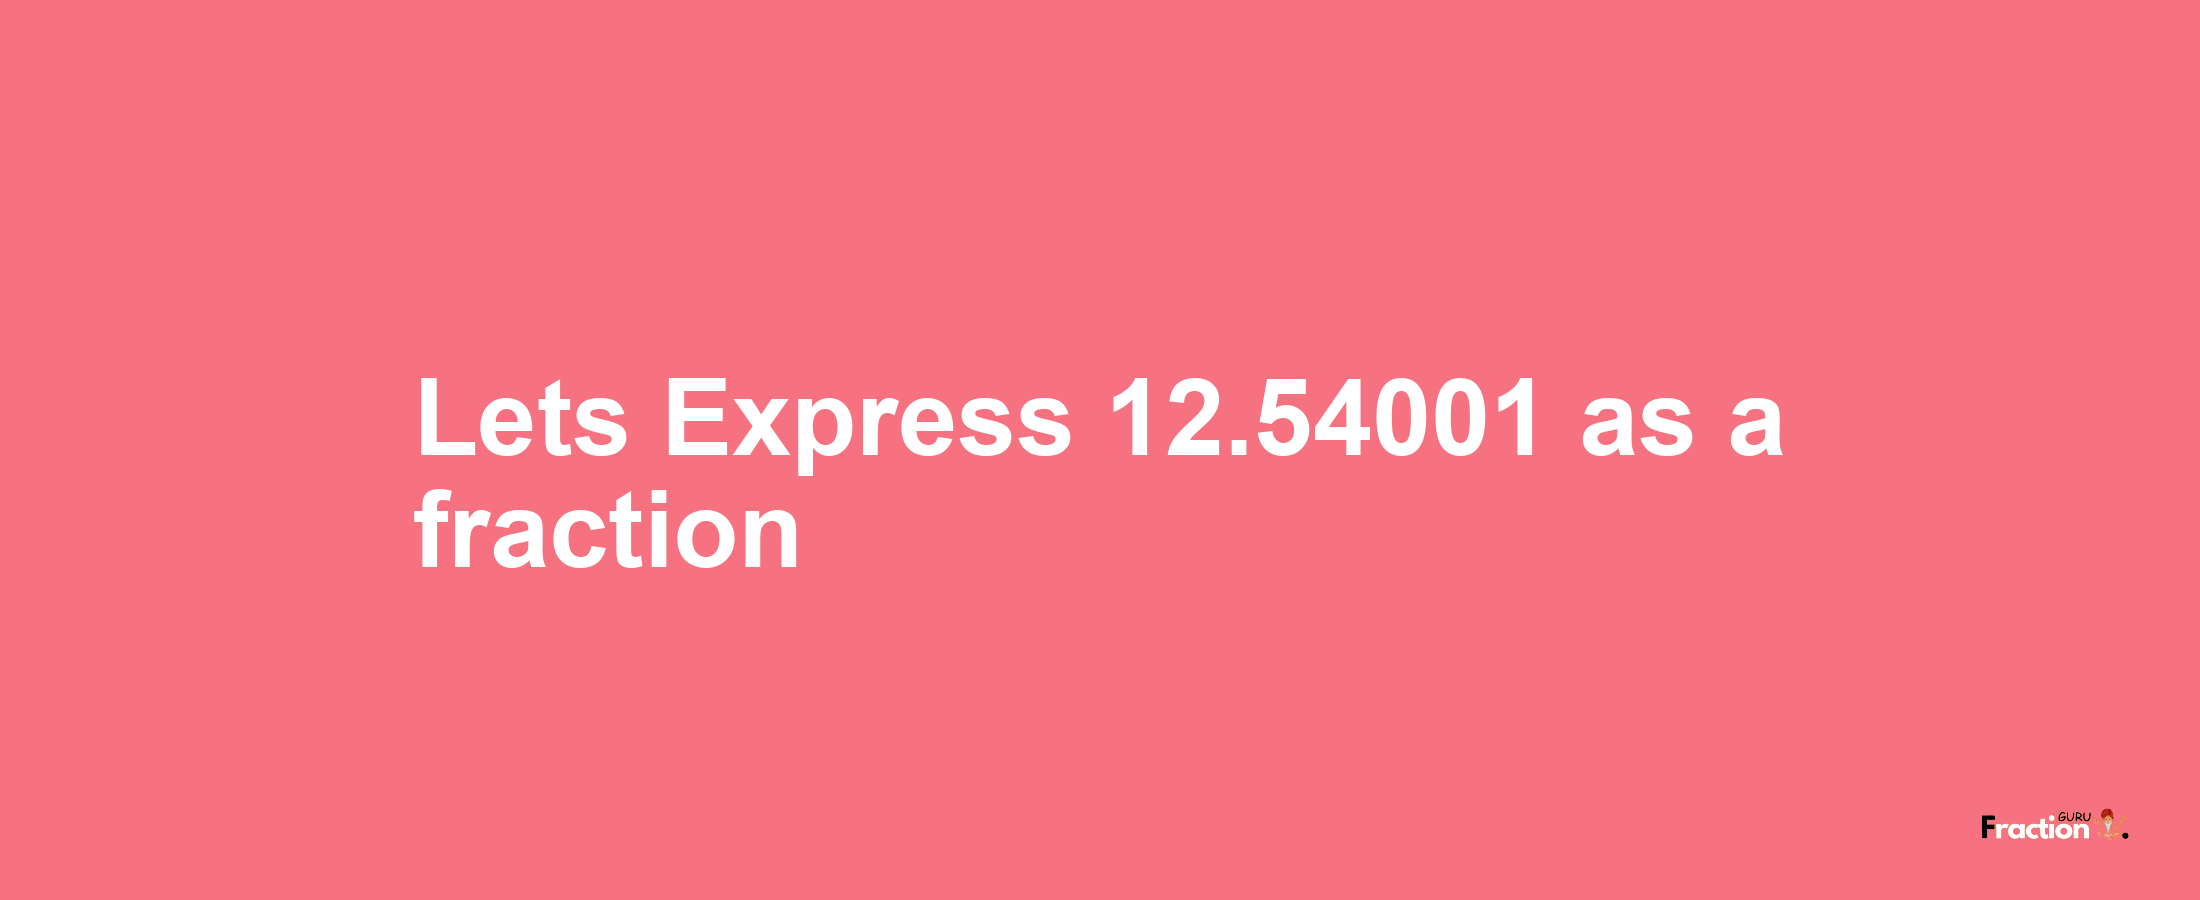 Lets Express 12.54001 as afraction